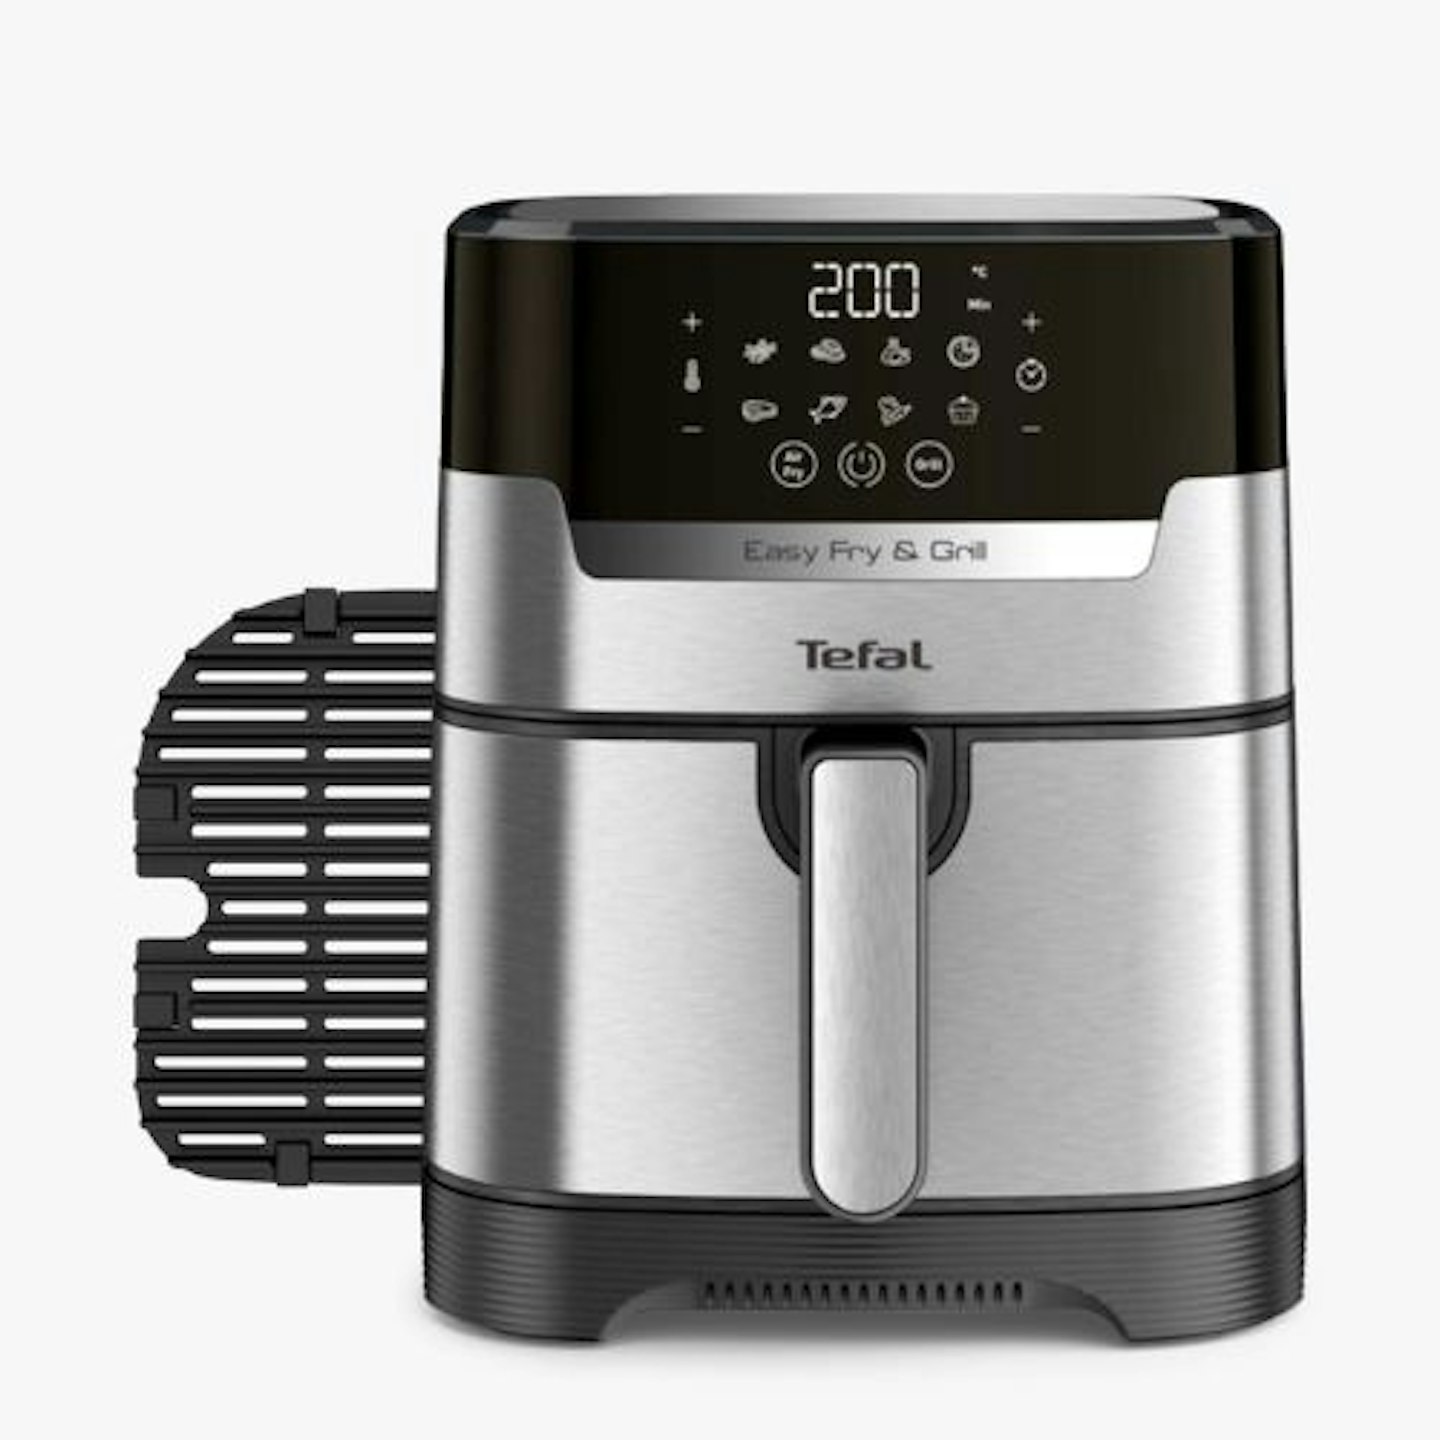 Tefal EY505D Easy Fry Precision+ 2in1 Digital Air Fryer And Grill, 4.2L, Chrome/Black